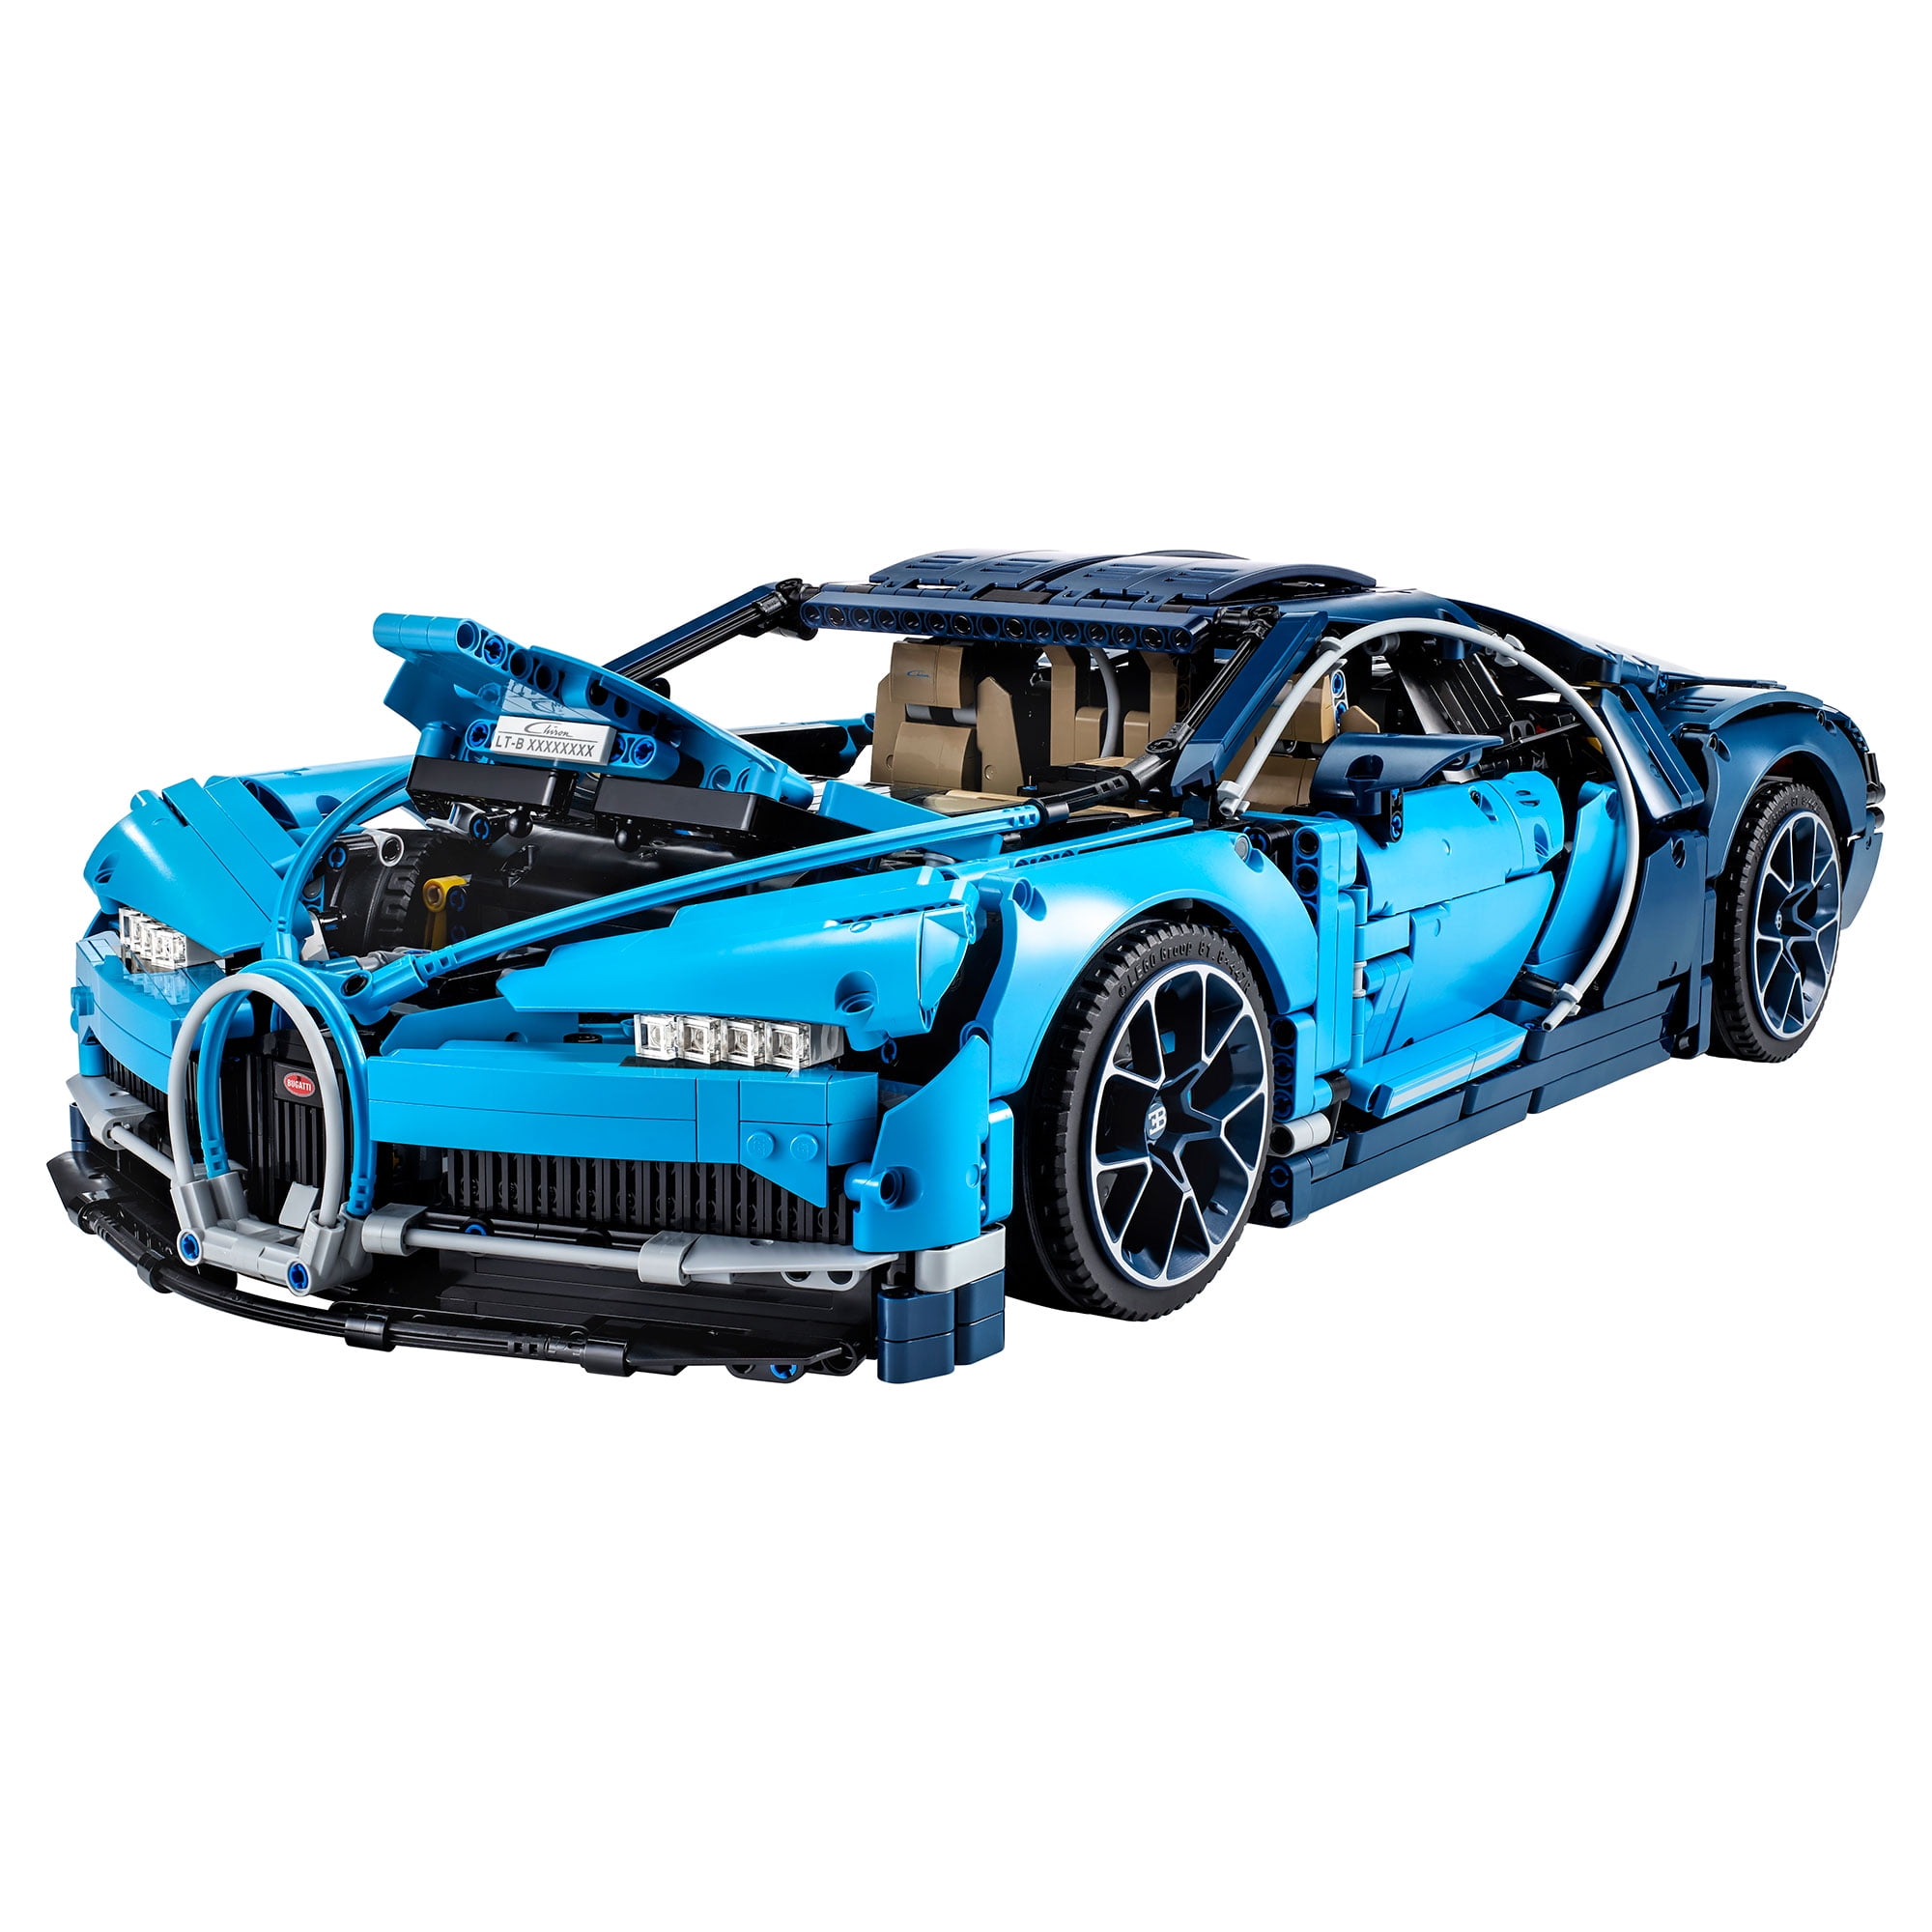 LEGO Technic Bugatti Chiron 42083 Race Car Building Kit and Engineering Adult Collectible Sports Car with Scale Model Engine (3599 Pieces) - Walmart.com